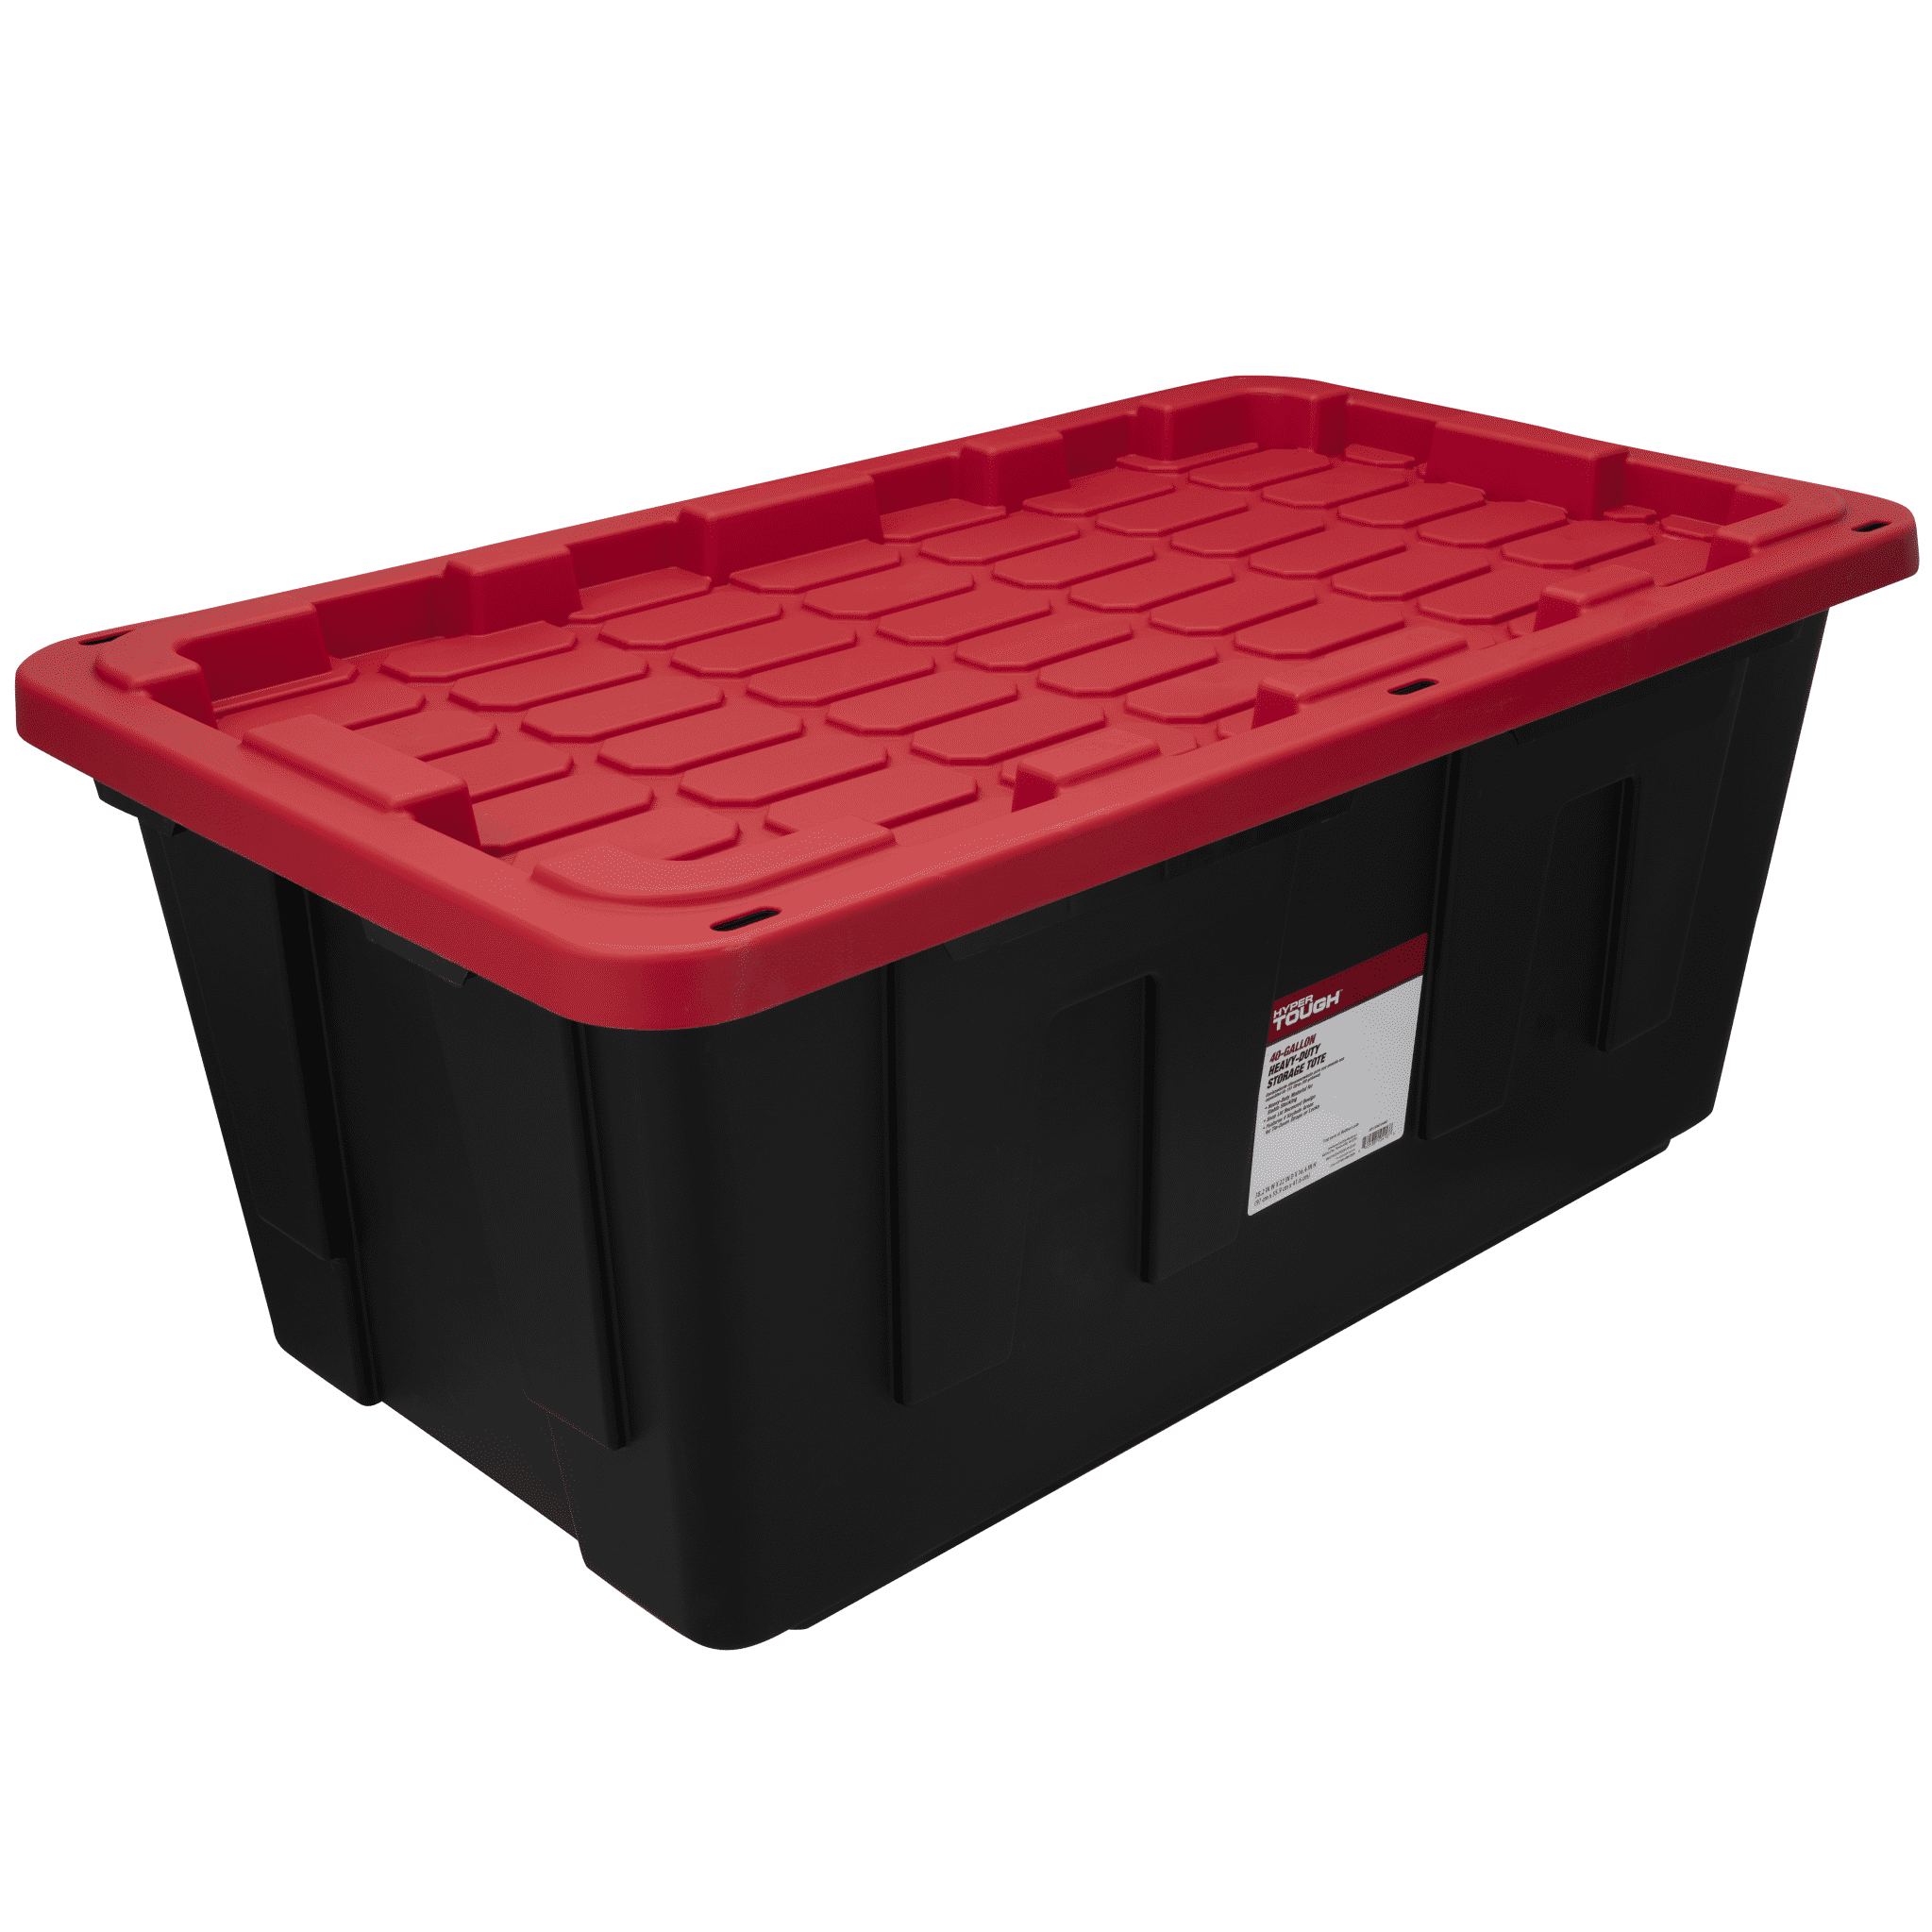 Hyper Tough 40 Gallon Snap Lid Plastic Storage Bin Container, Black with Red Lid